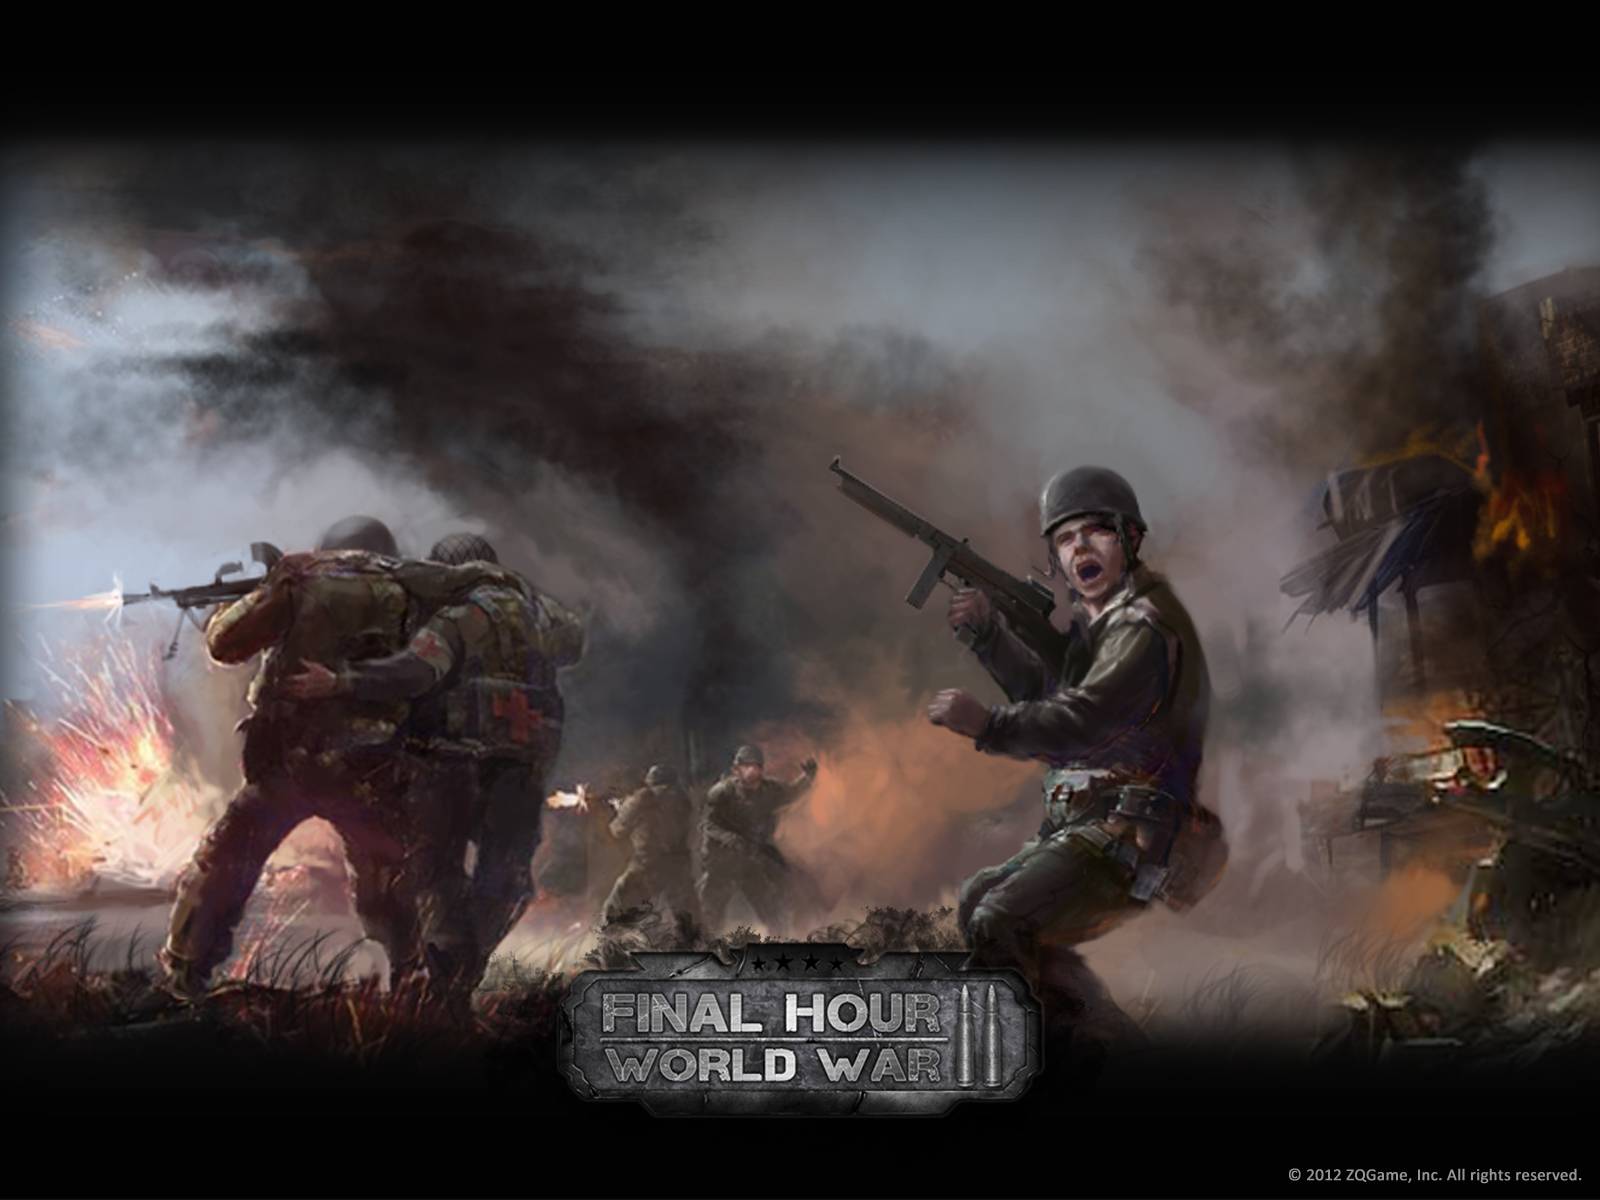 The Second World War download the new for windows